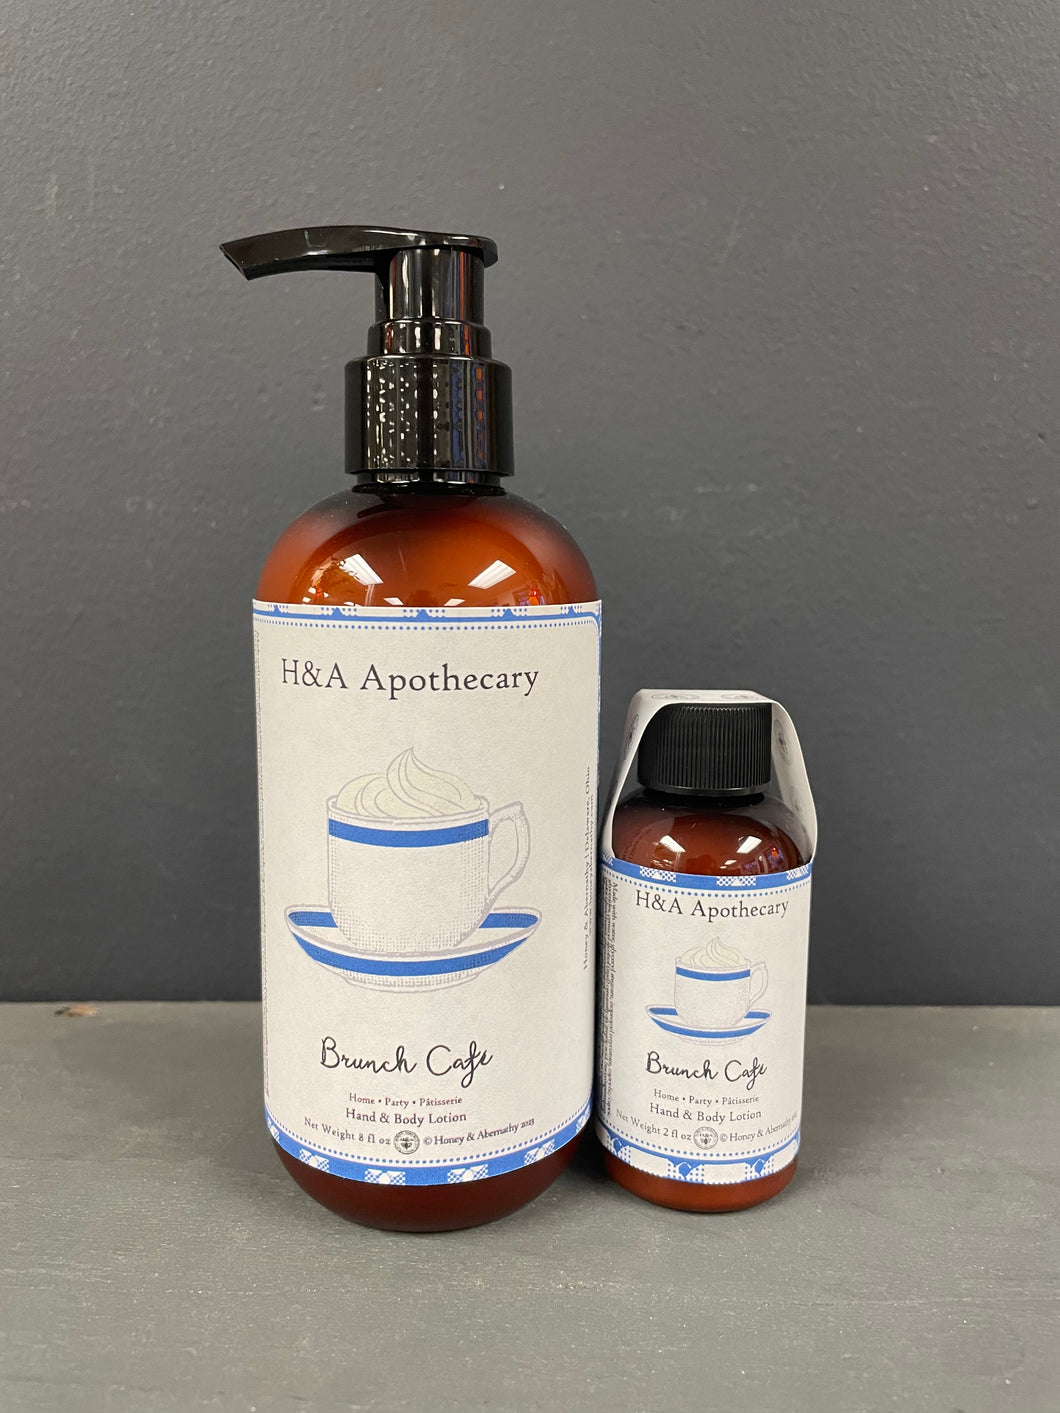 H&A Apothecary Brunch Cafe Hand & Body Lotion